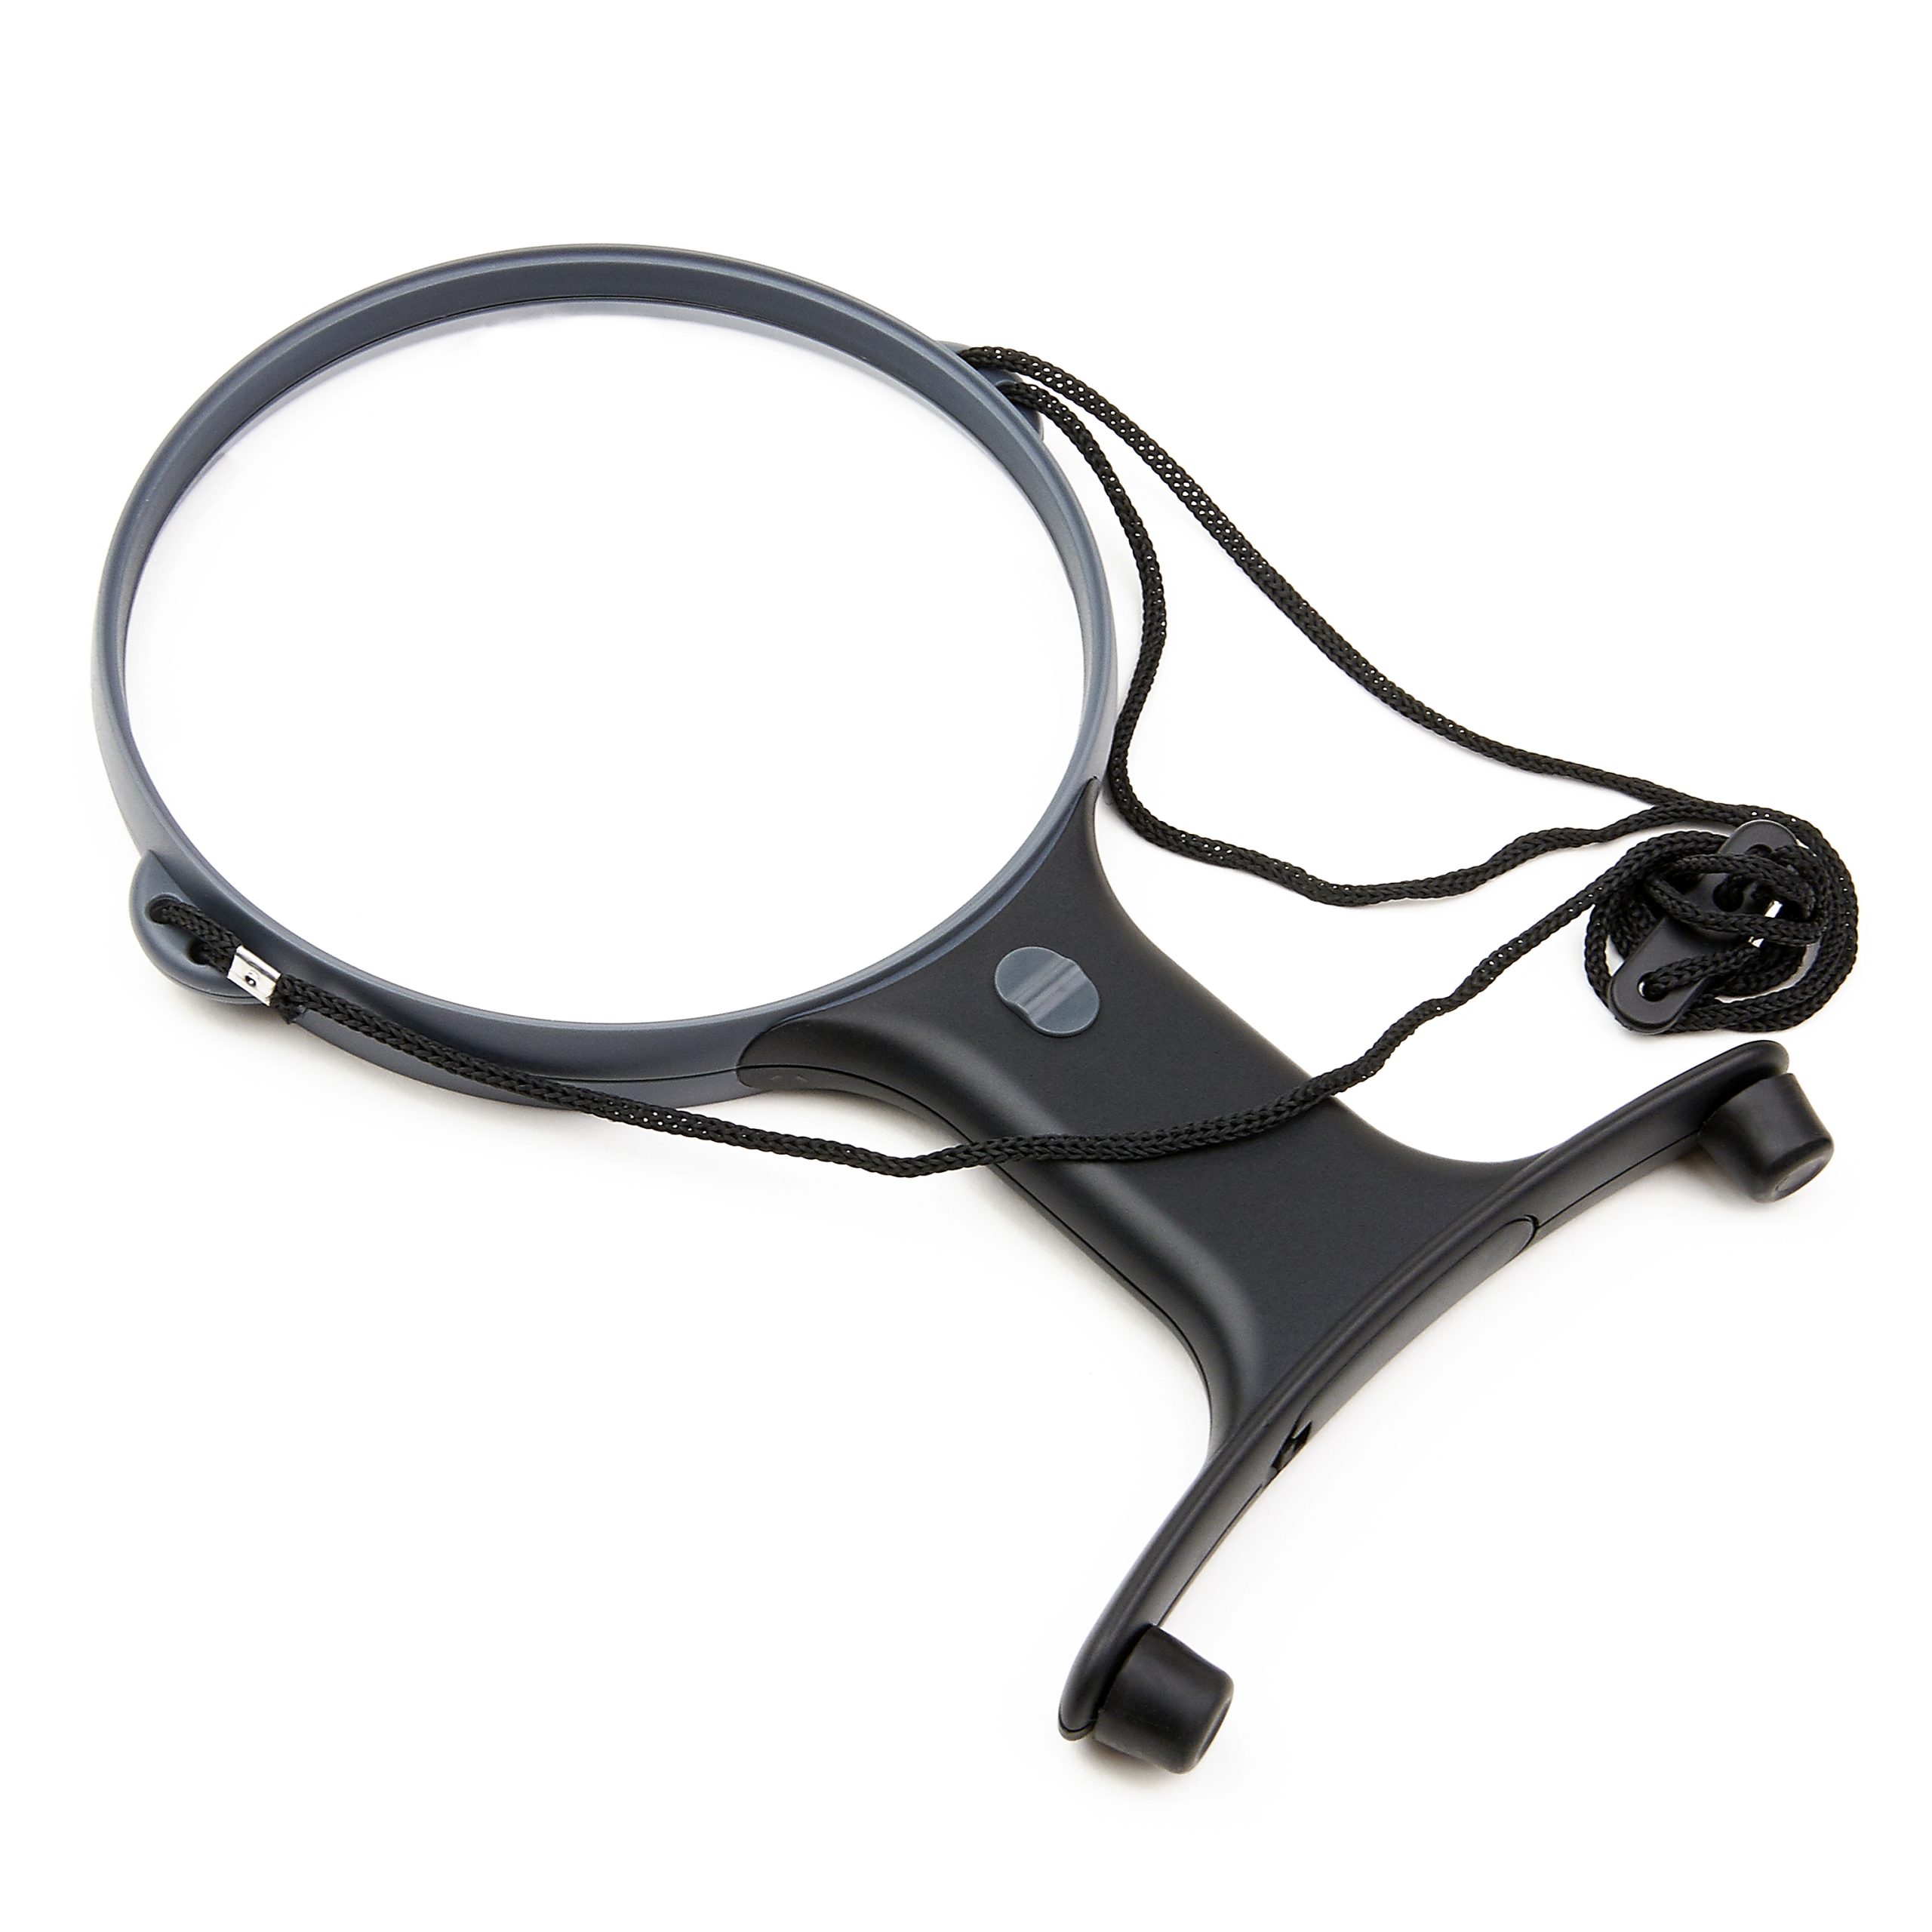 Carson MagniLamp Lighted Magnifier